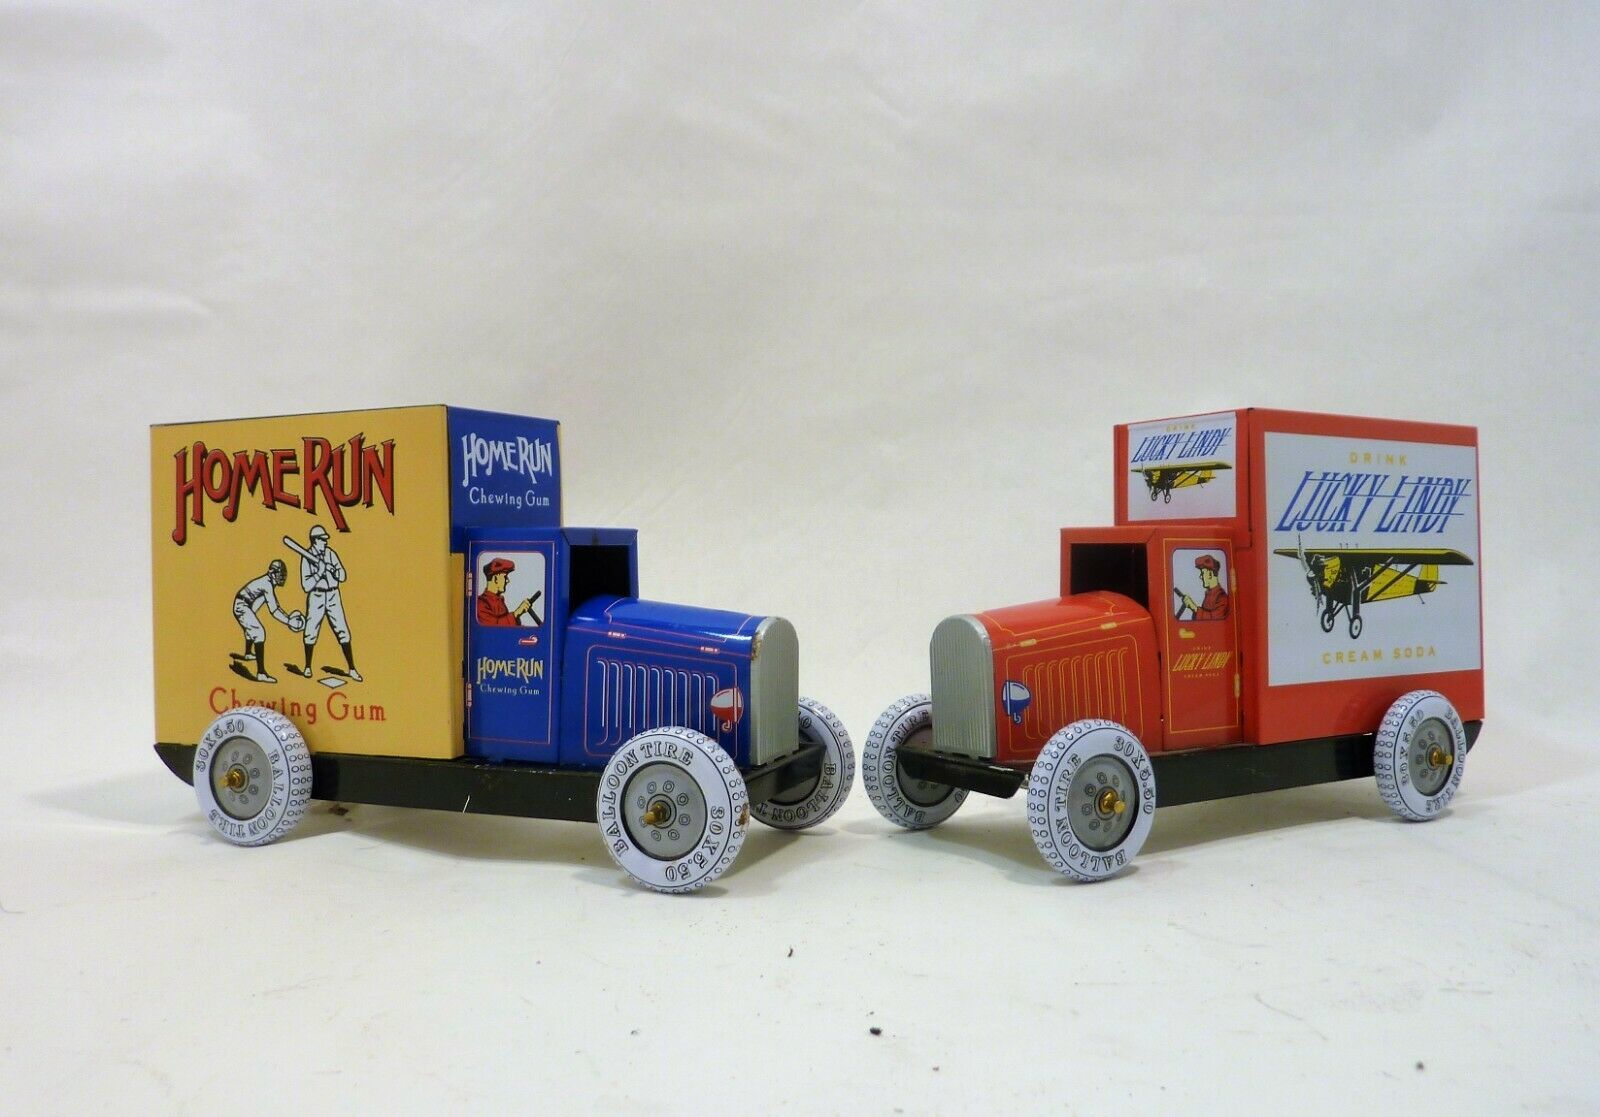 Lot of 2 Schylling Tin Delivery Trucks Lucky Lindy and Home Run - $36.95